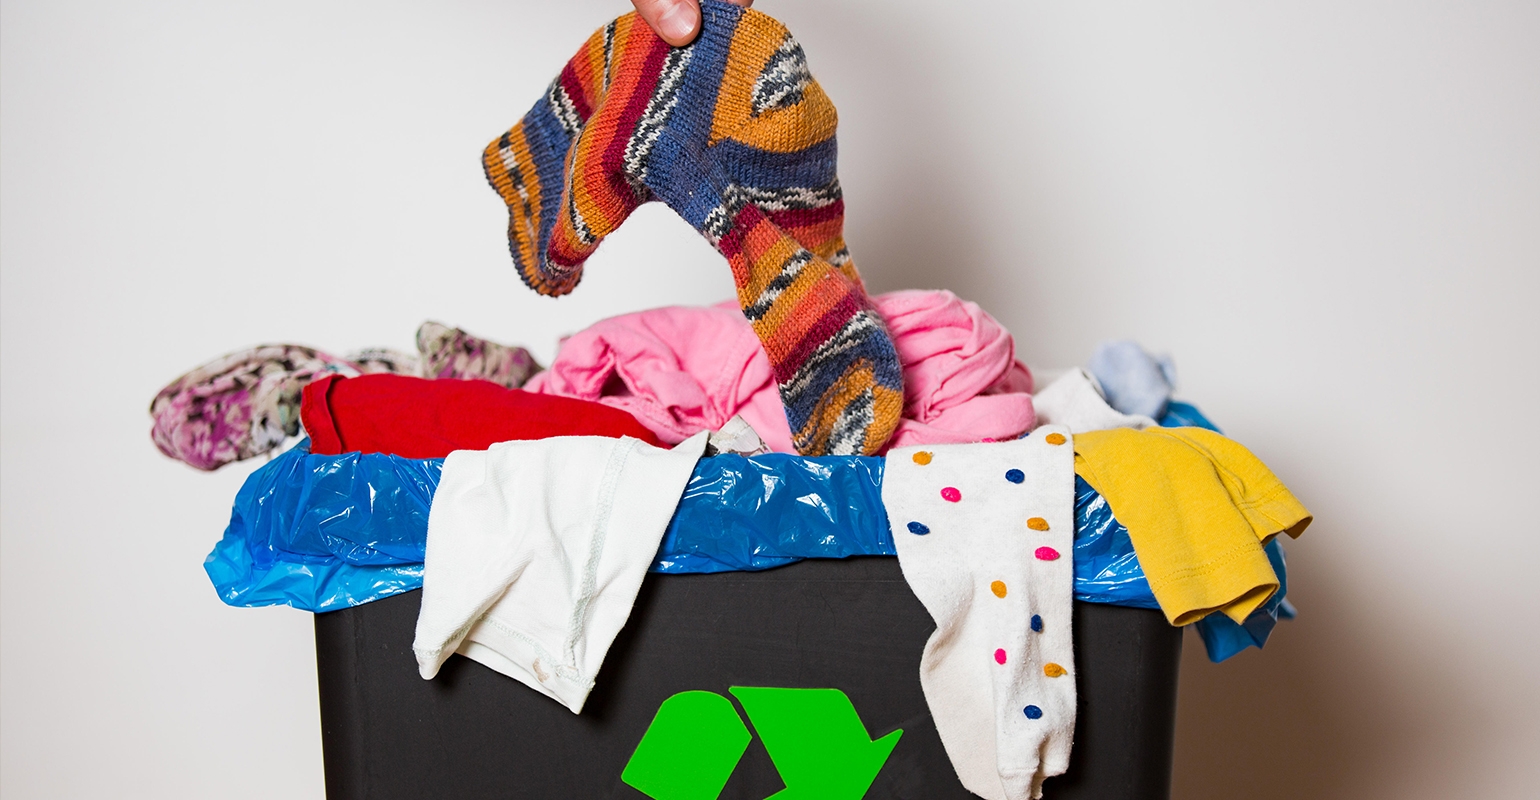 Baltimore County Partners with Helpsy to Increase Textile Recycling